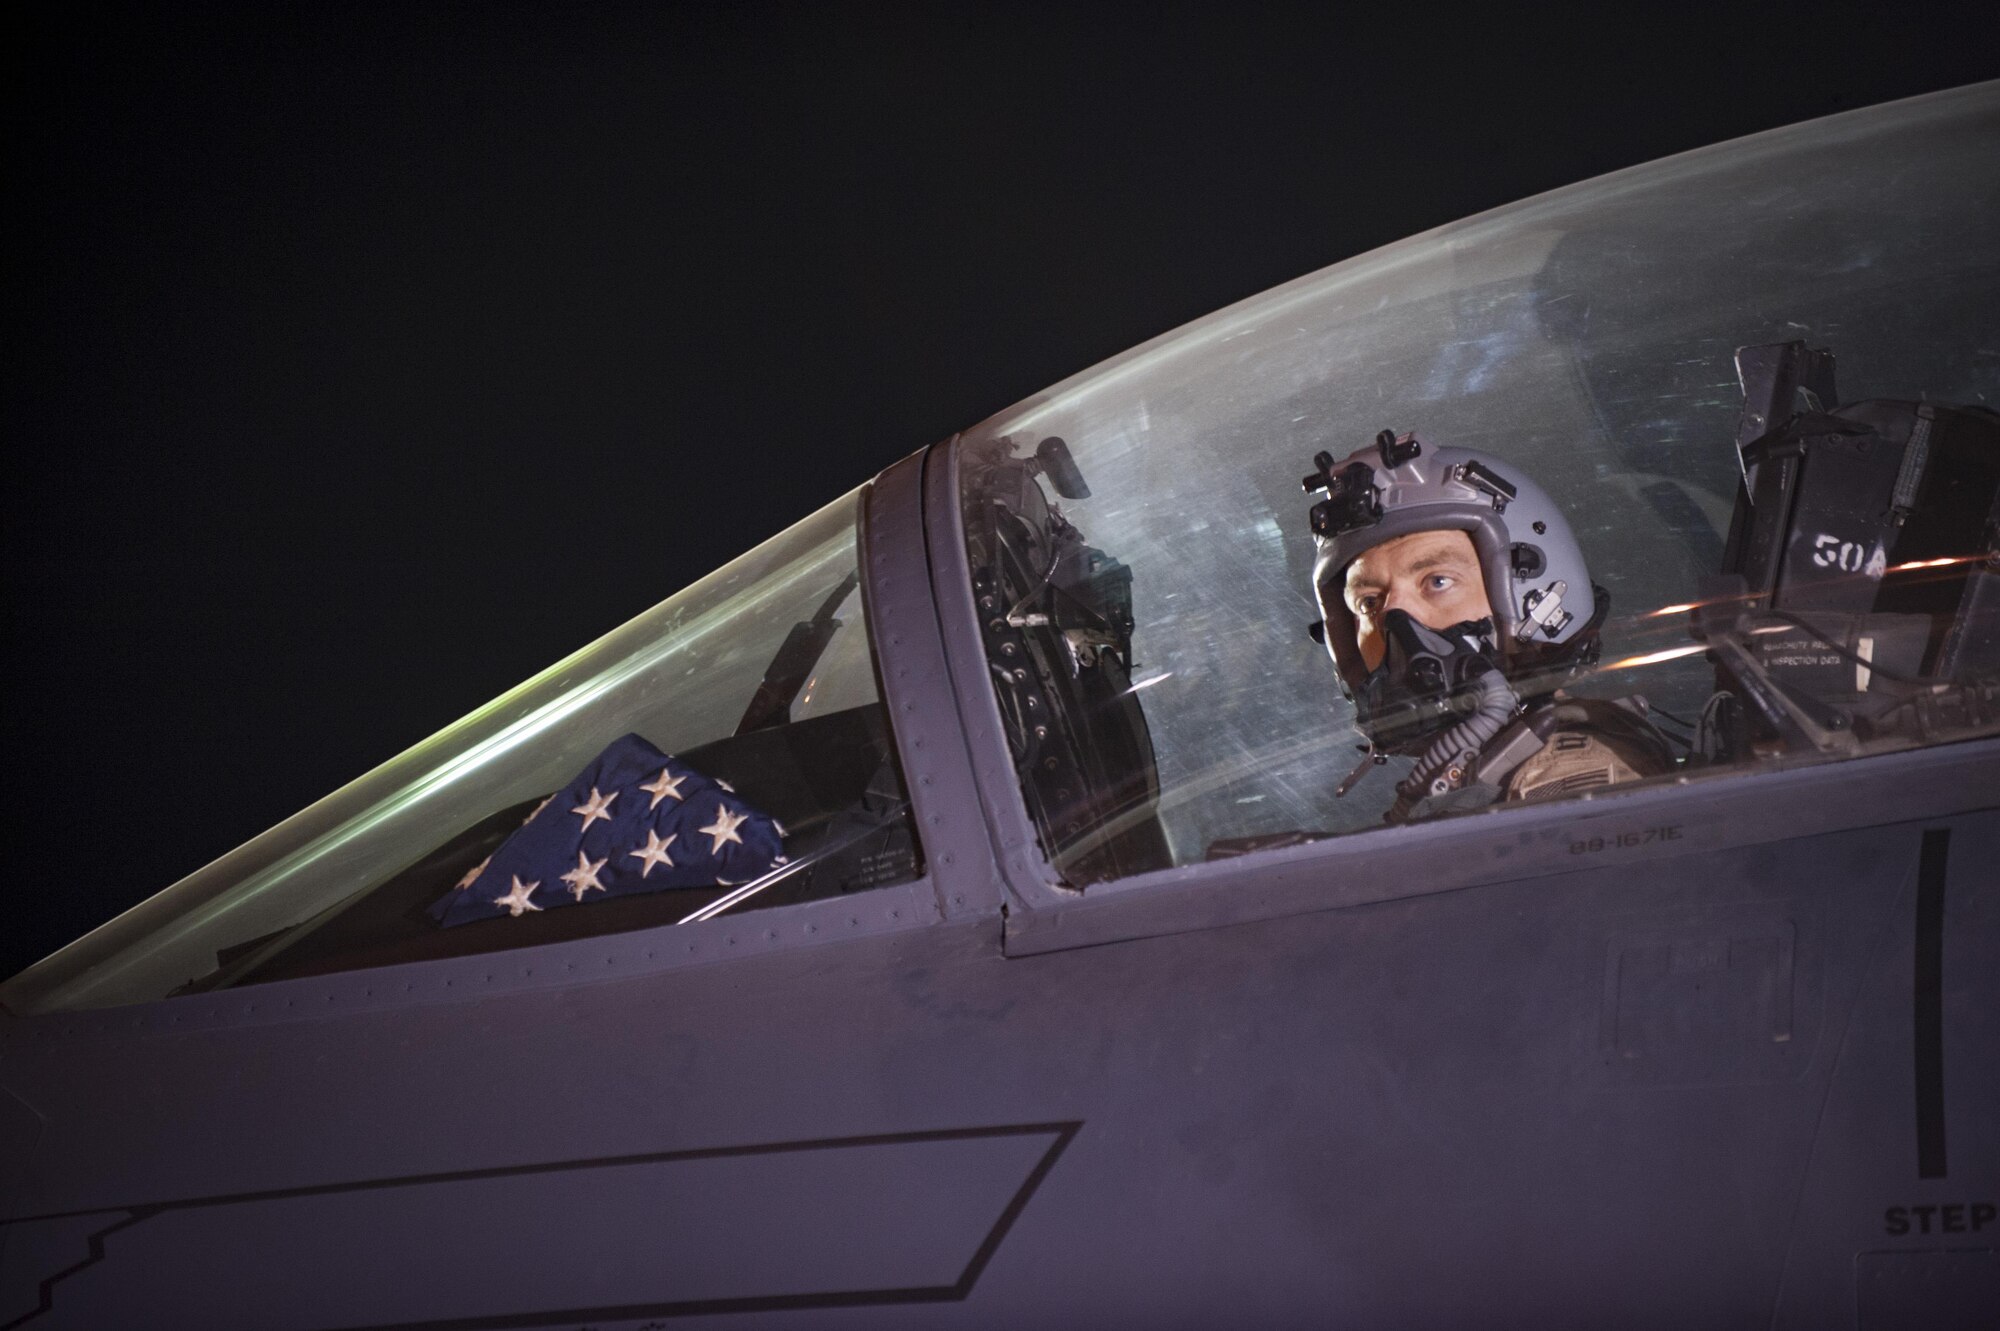 An aircrew member assigned to the 336th Expeditionary Fighter Squadron prepares waits for clearance to taxi, prior to a sortie in support of Operation Inherent Resolve objectives November 7, 2017 in Southwest Asia. The 336th EFS arrives in the region after a recent string of major victories for Coalition forces on the ground and will look to capitalize on that momentum. (U.S. Air Force photo by Senior Airman Joshua Kleinholz)